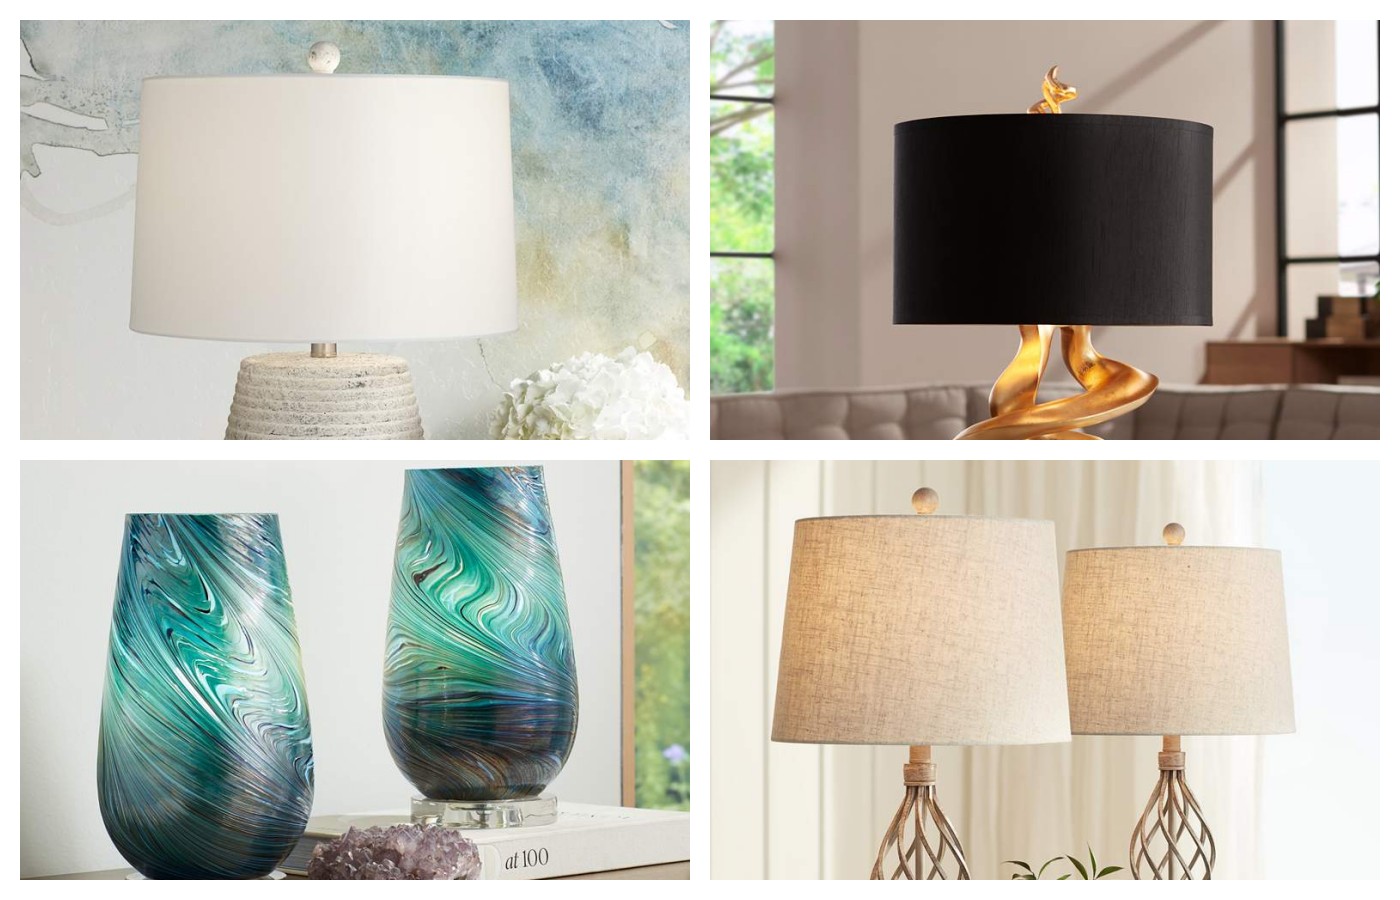 Contemporary Table Lamps That Will Light And Delight: The Top 9 Picks!